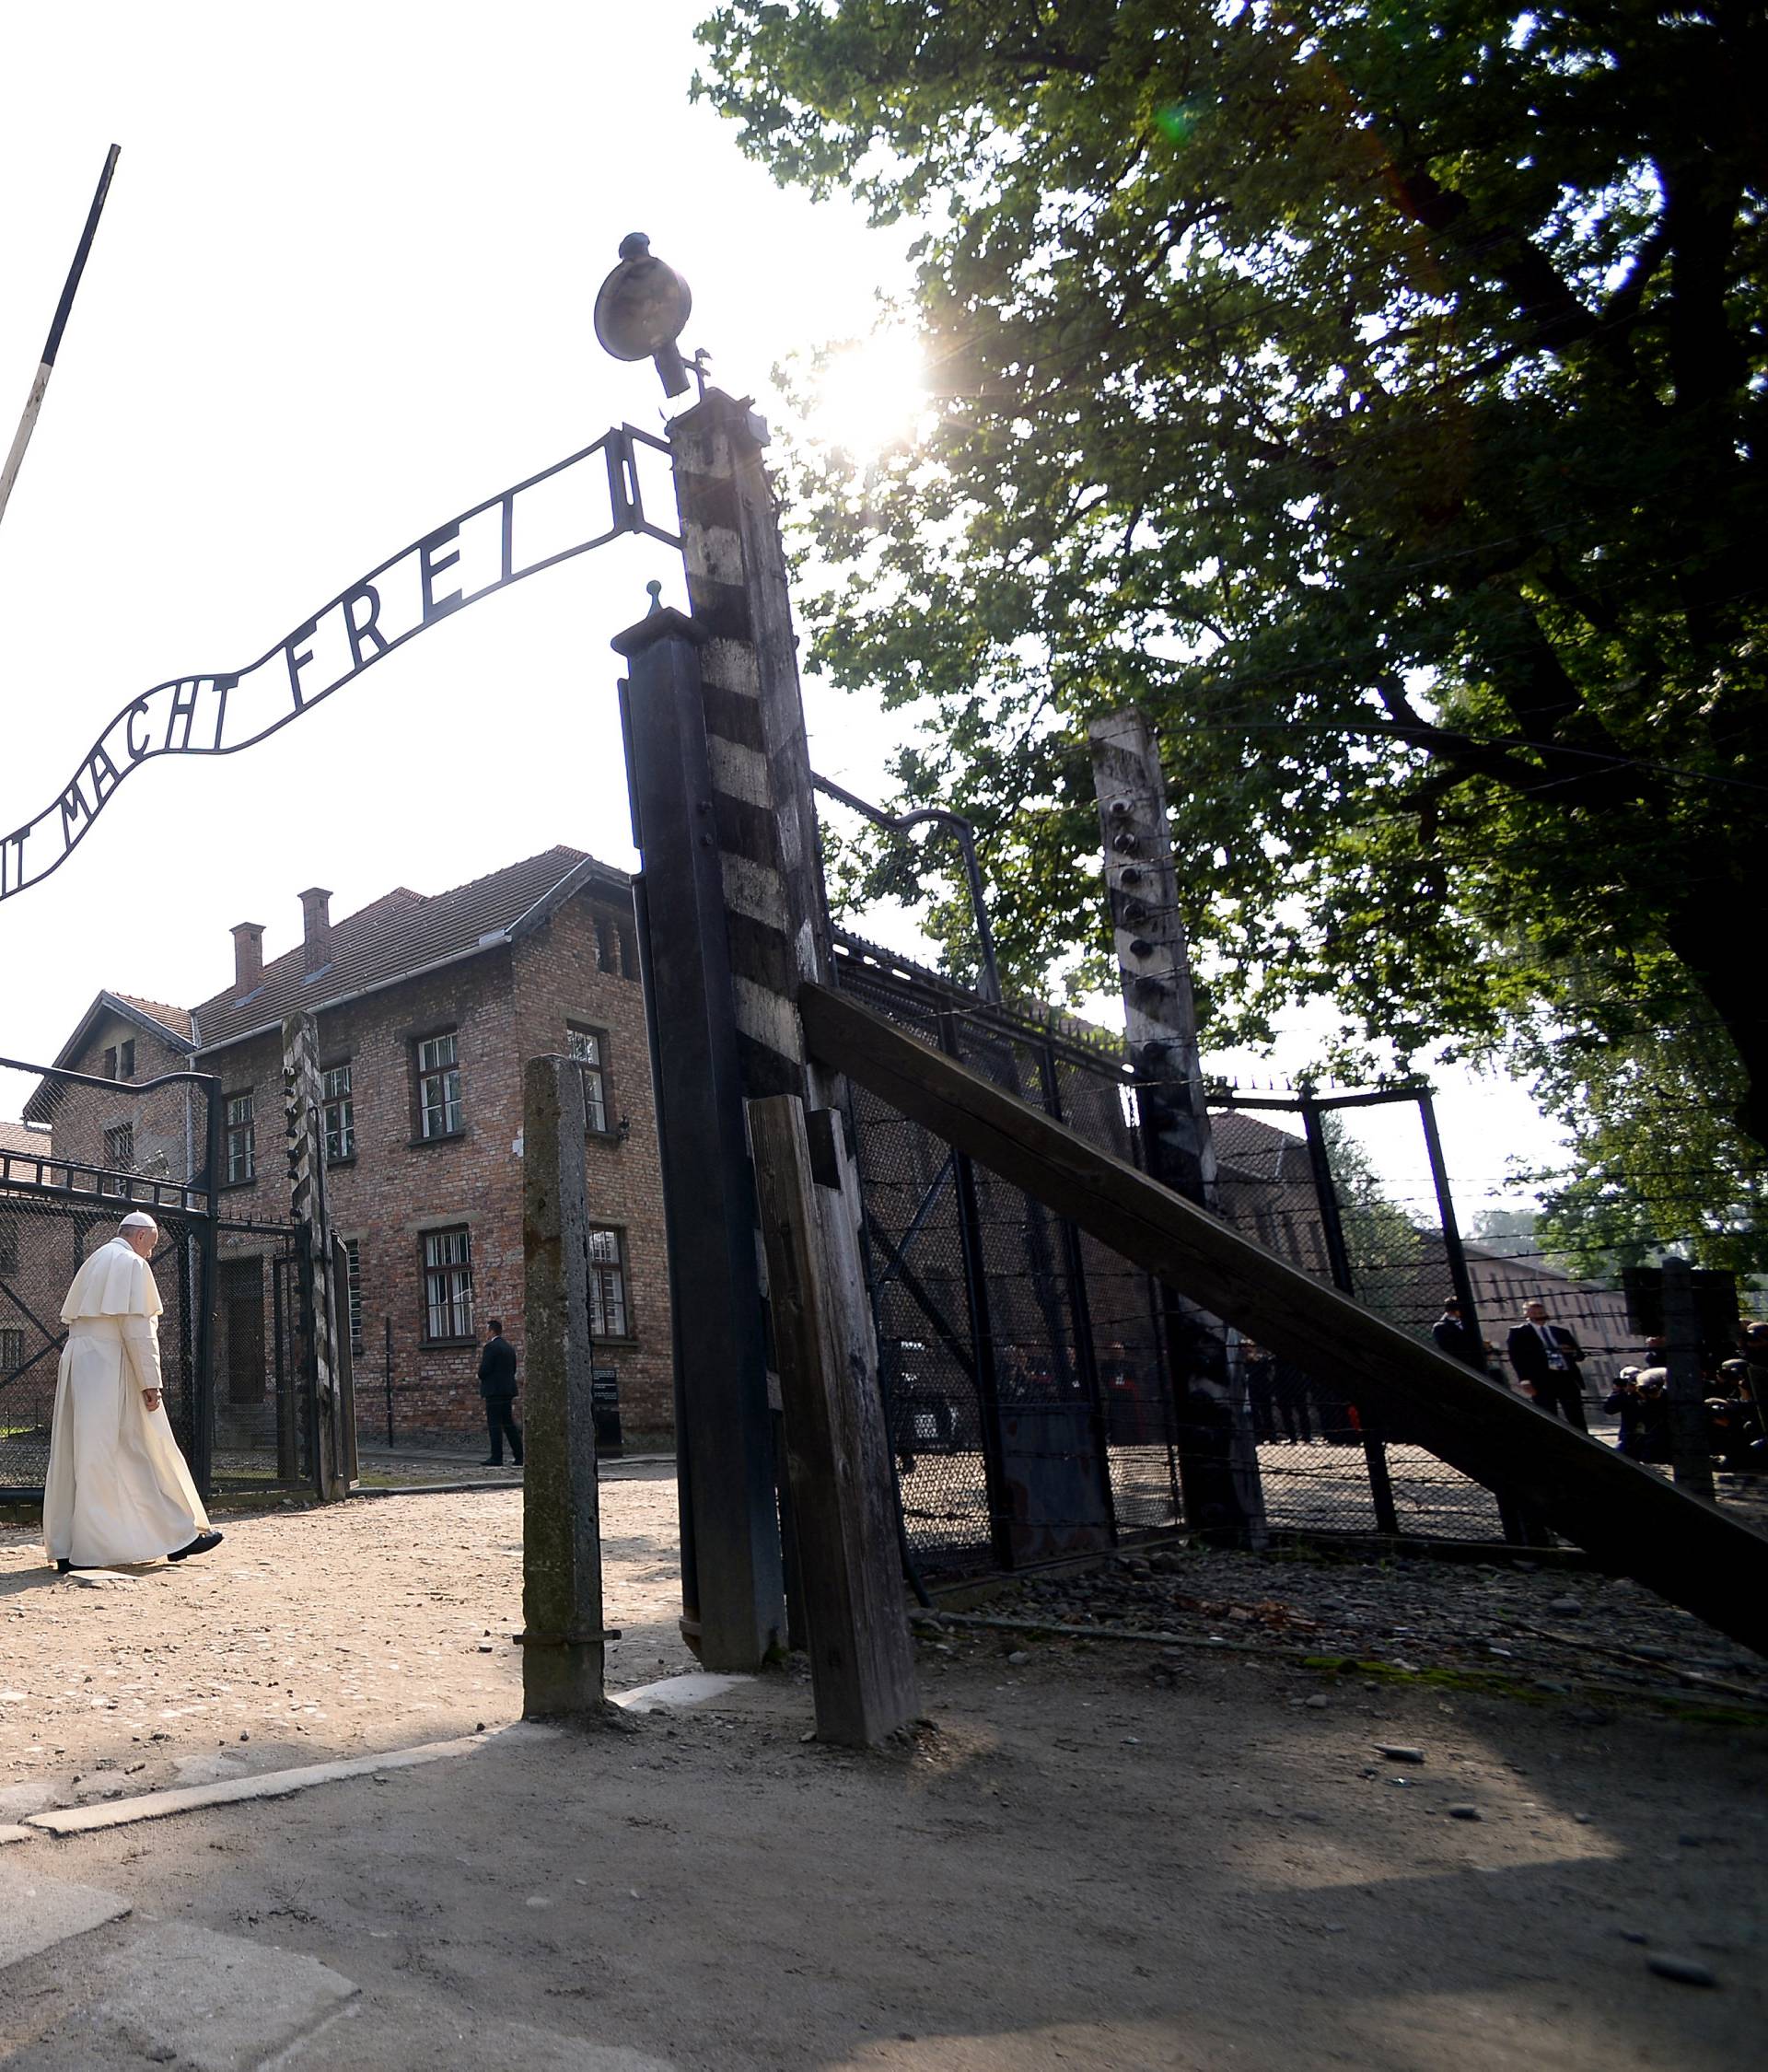 Pope Francis walks through Auschwitz's notorious gate during his visit to the former Nazi death camp